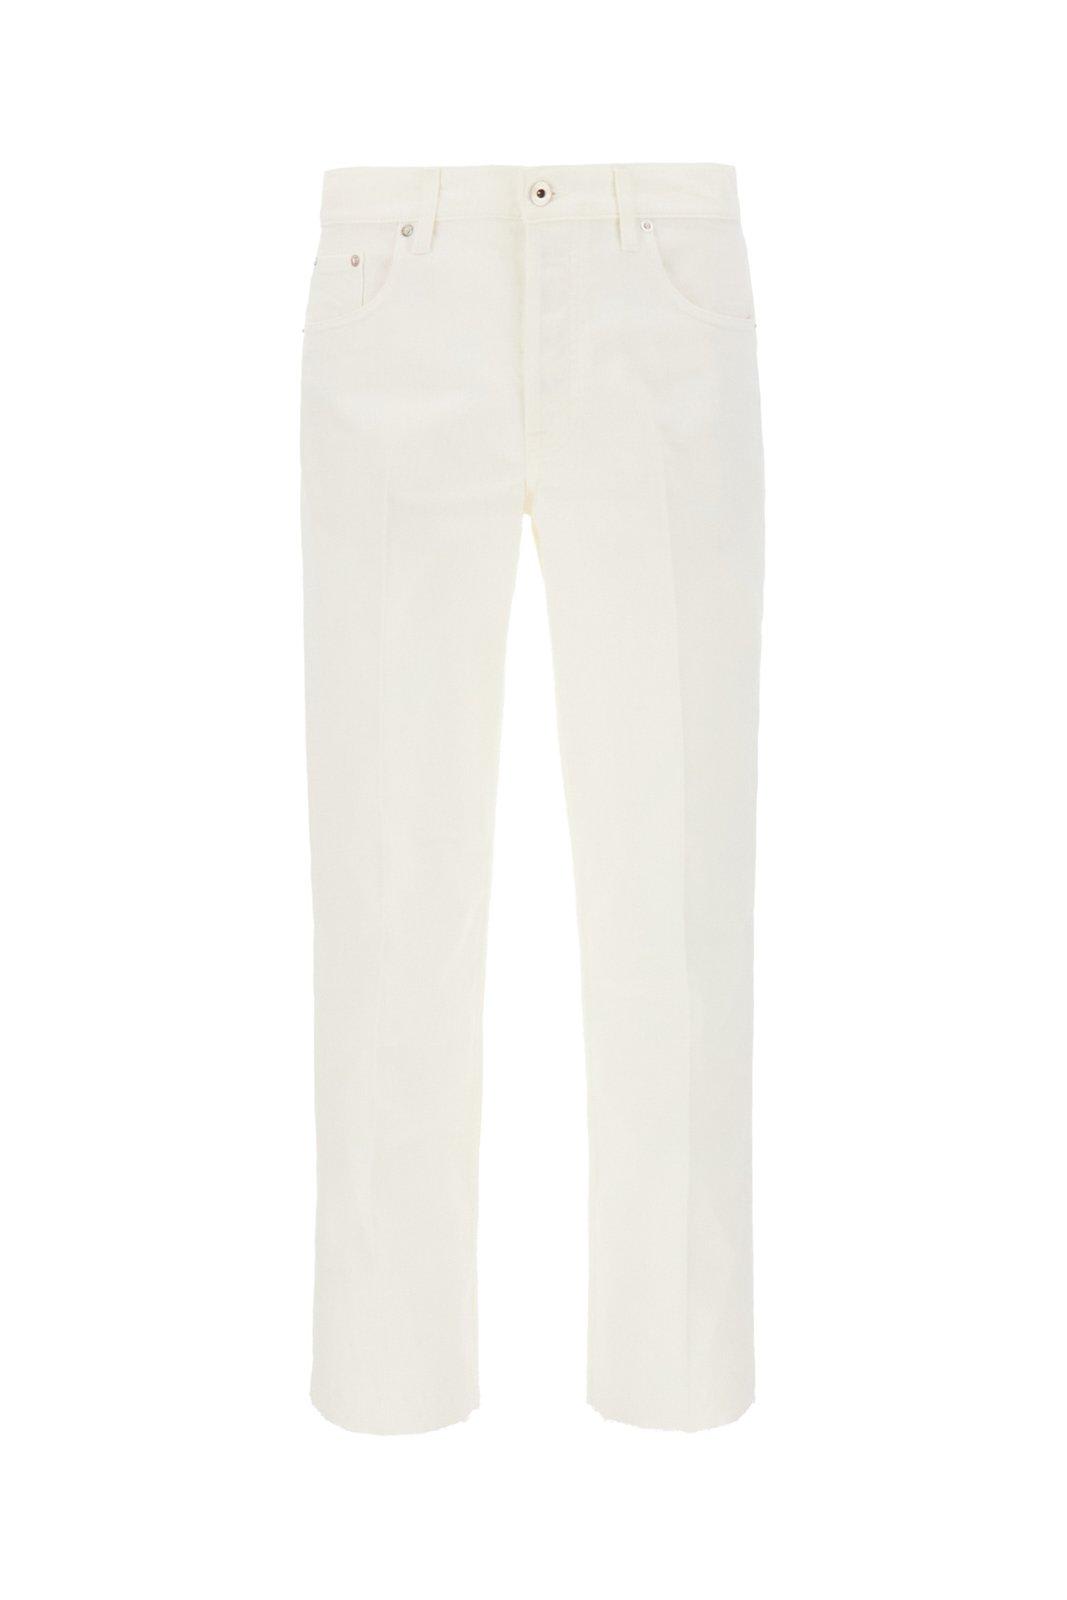 LANVIN BUTTON FITTED JEANS